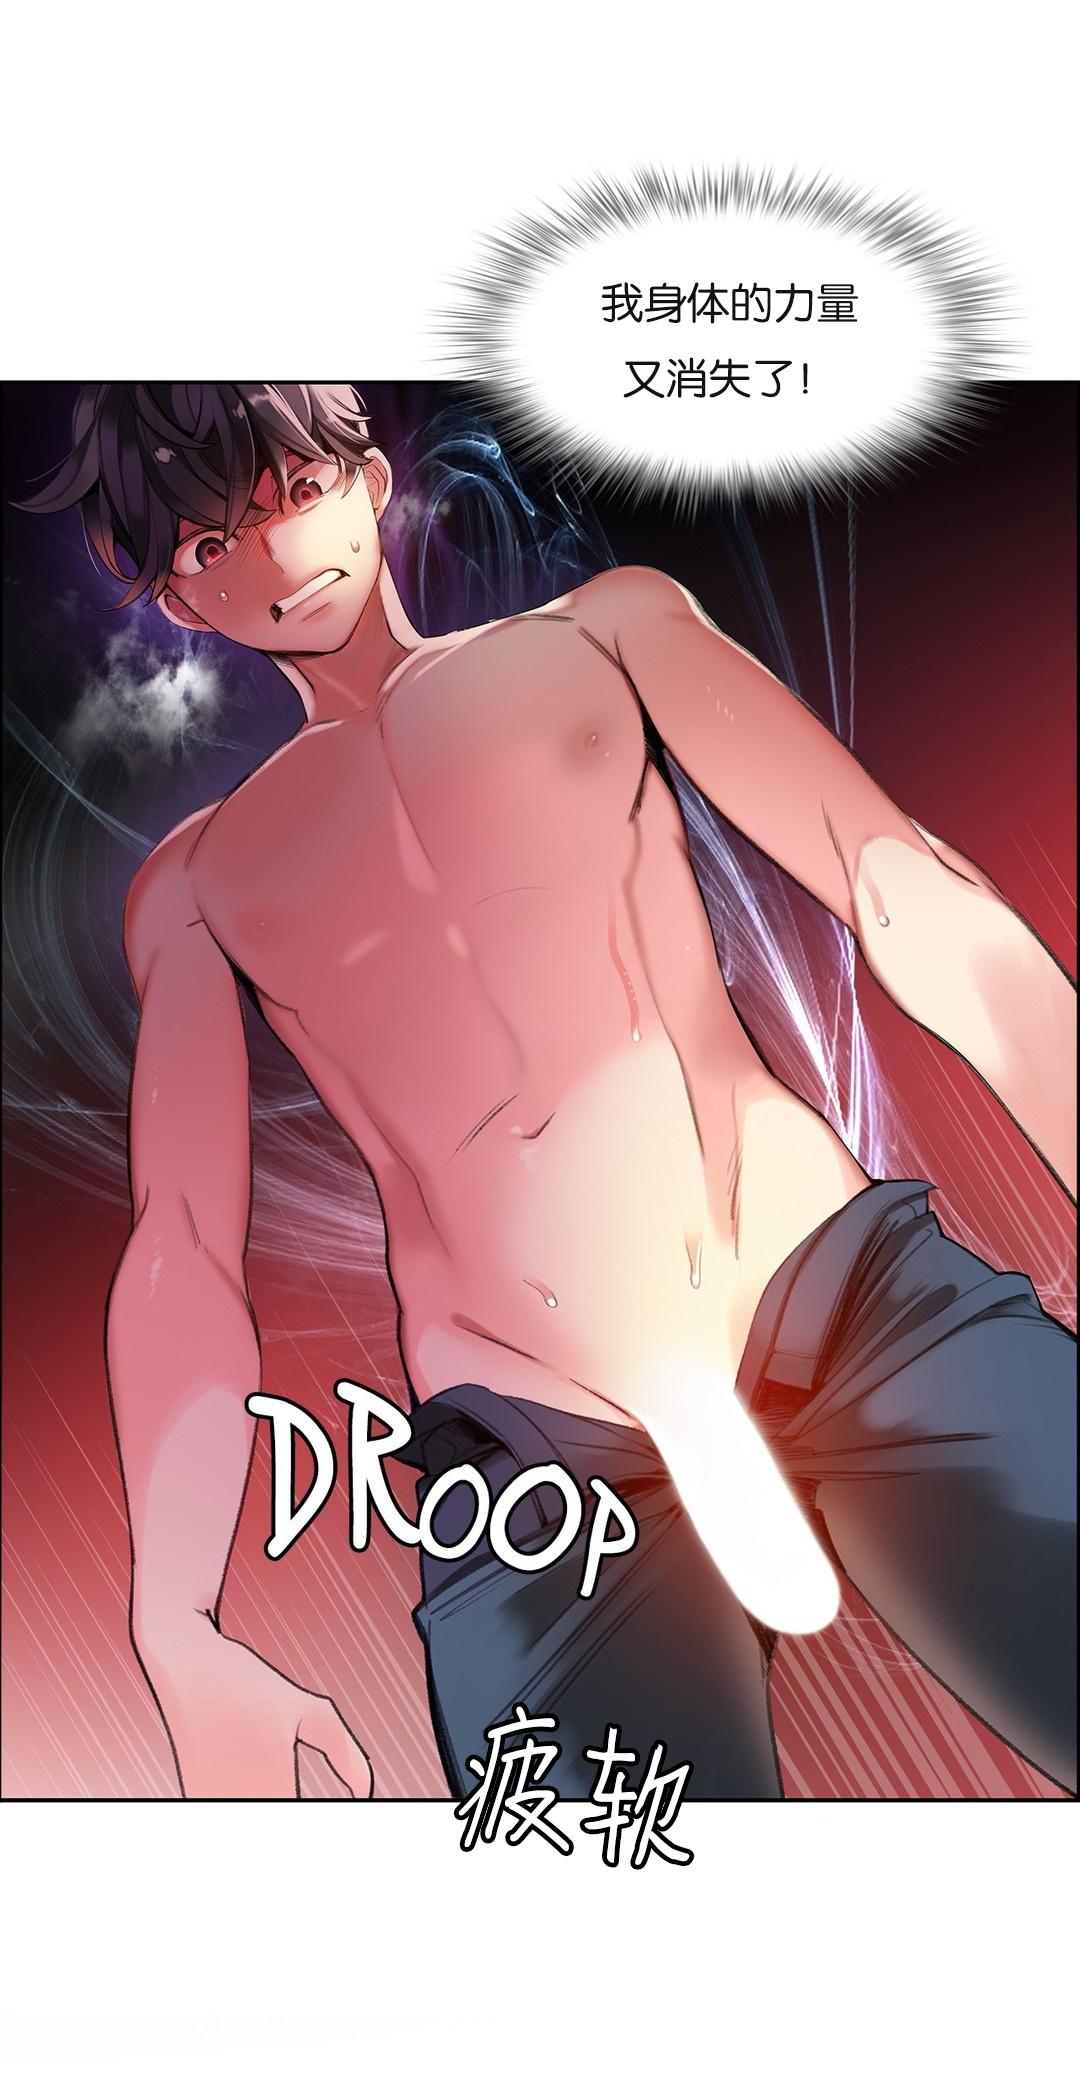 [Juder] Lilith`s Cord (第二季) Ch.61-65 [Chinese] [aaatwist个人汉化] [Ongoing] 141